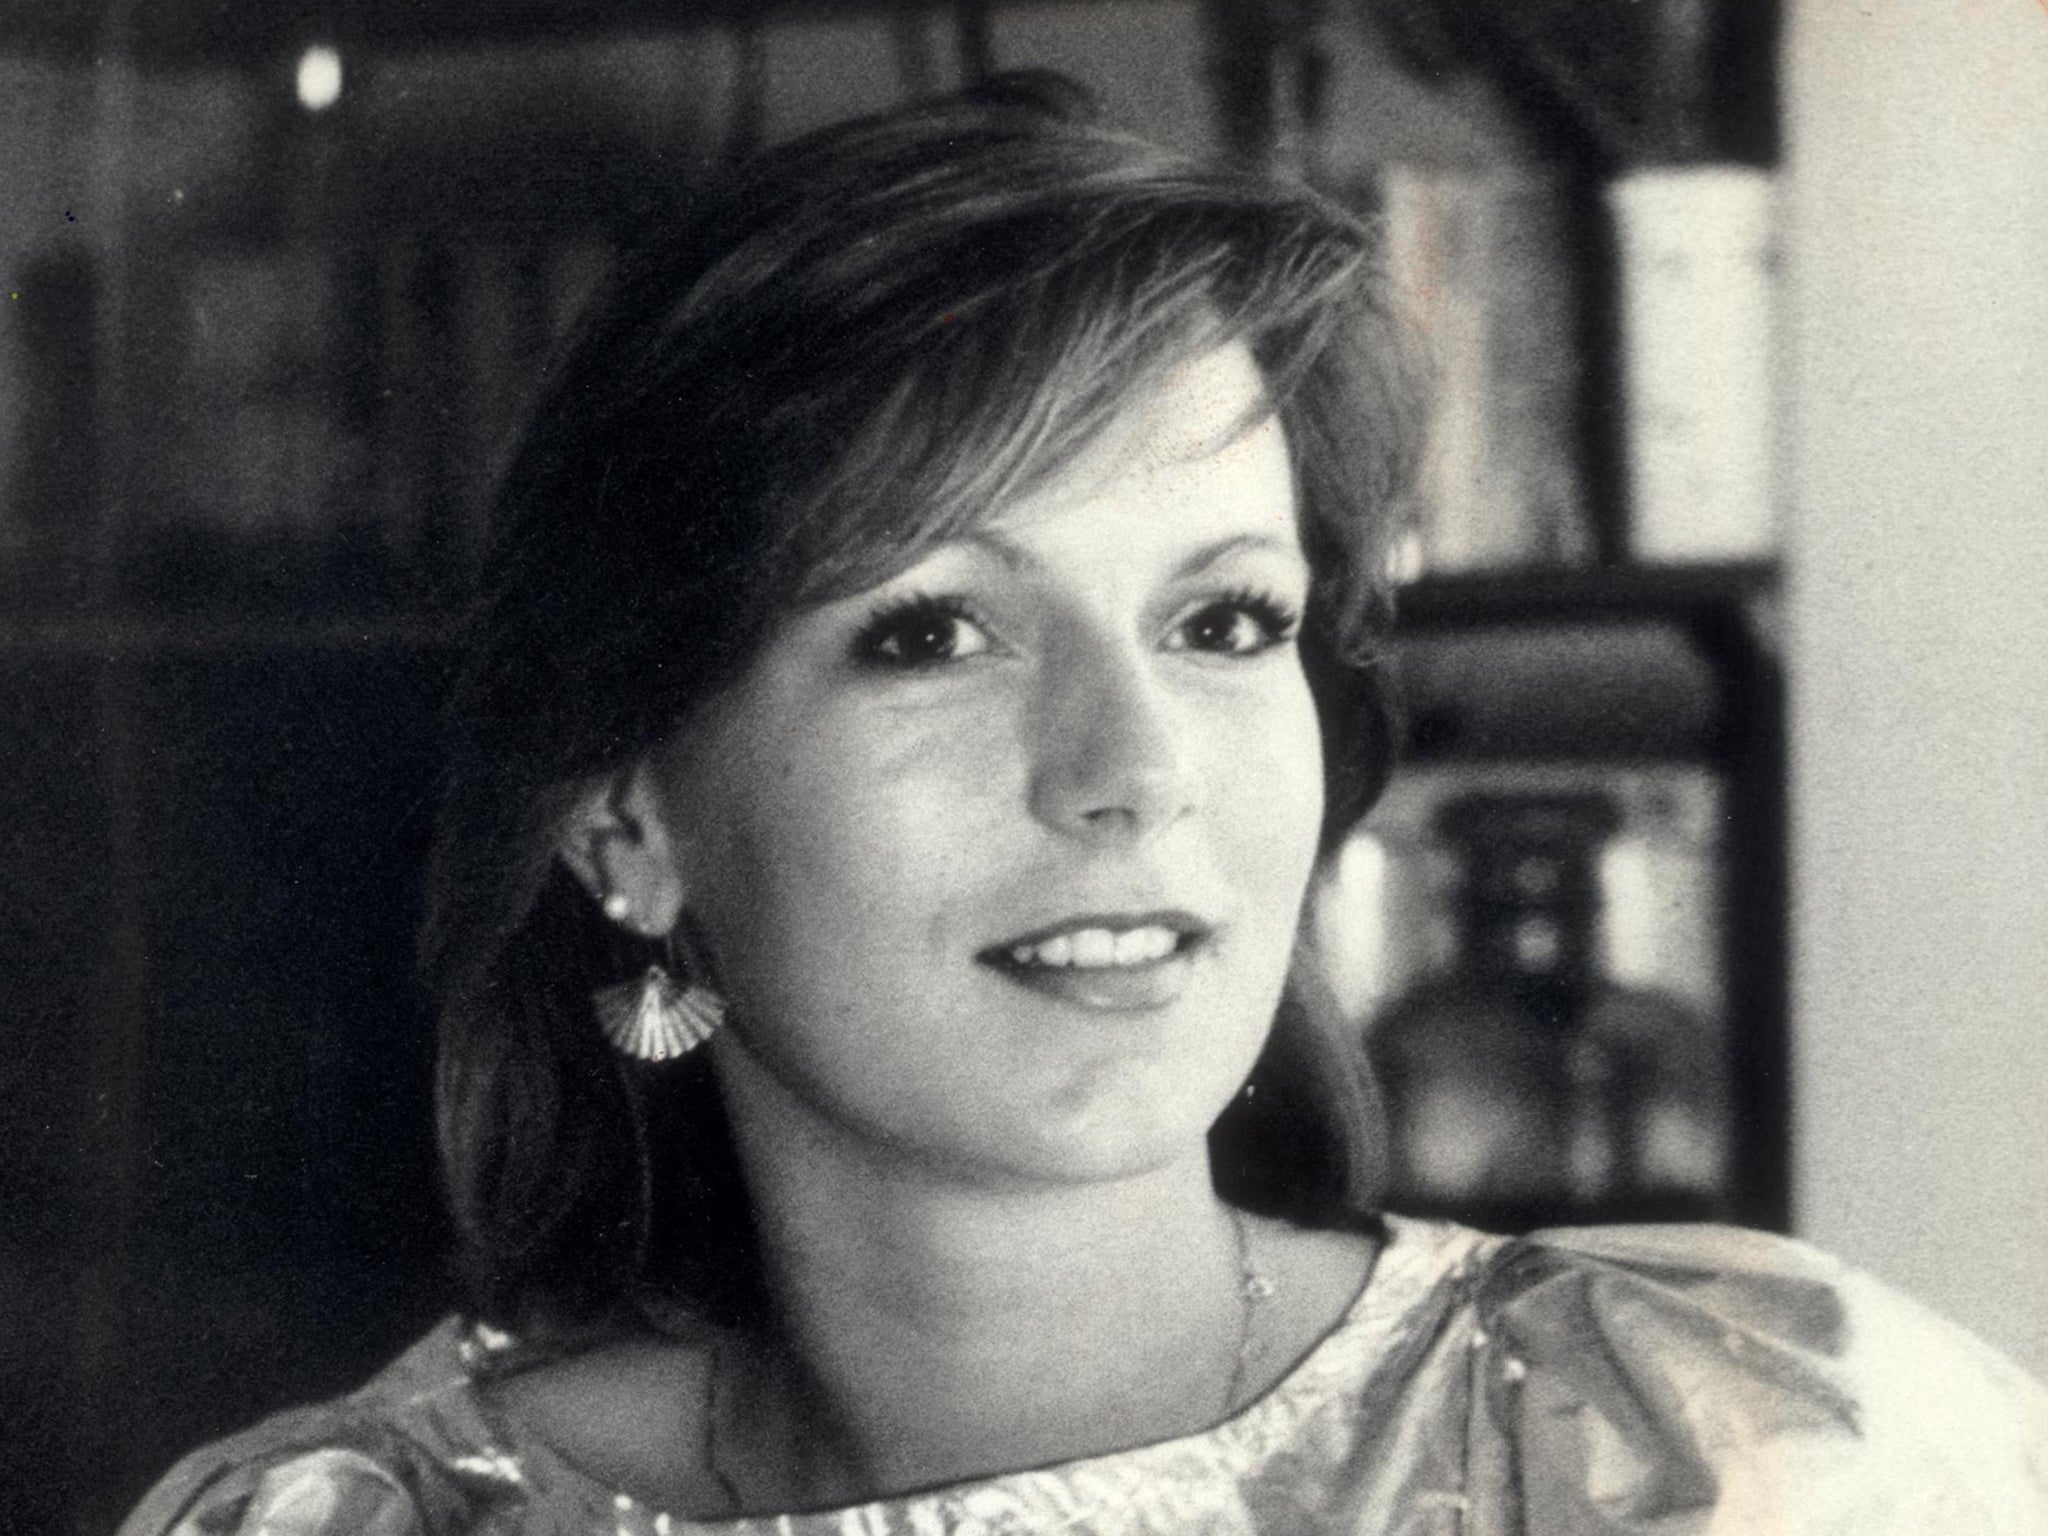 Suzy Lamplugh vanished into thin air